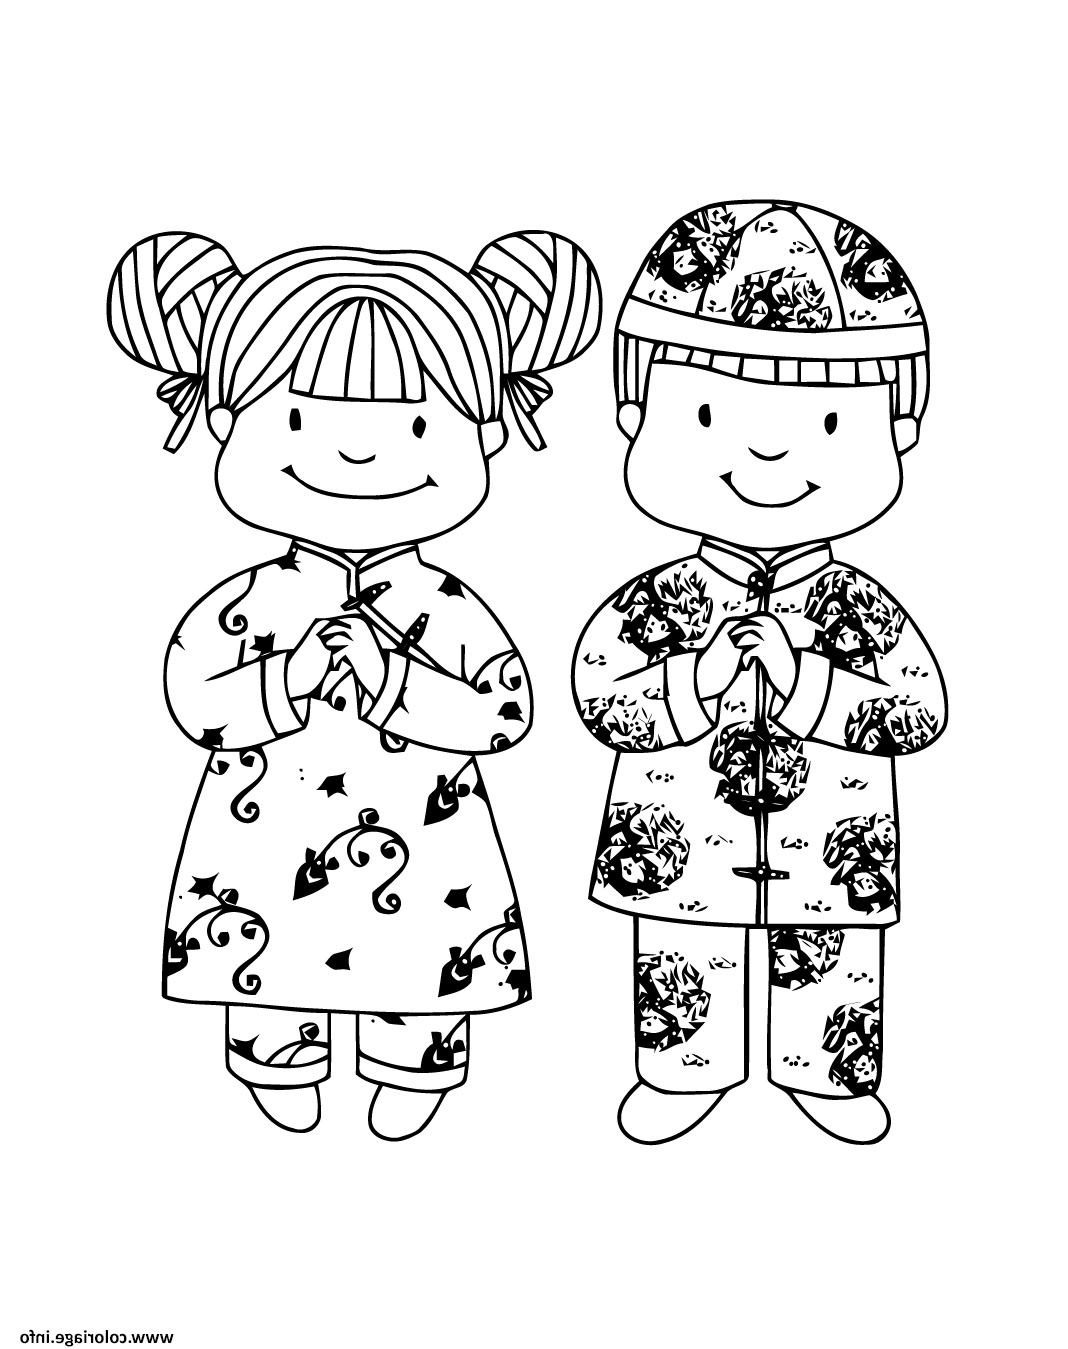 nouvel an chinois fille garcon tenue traditionelle coloriage dessin